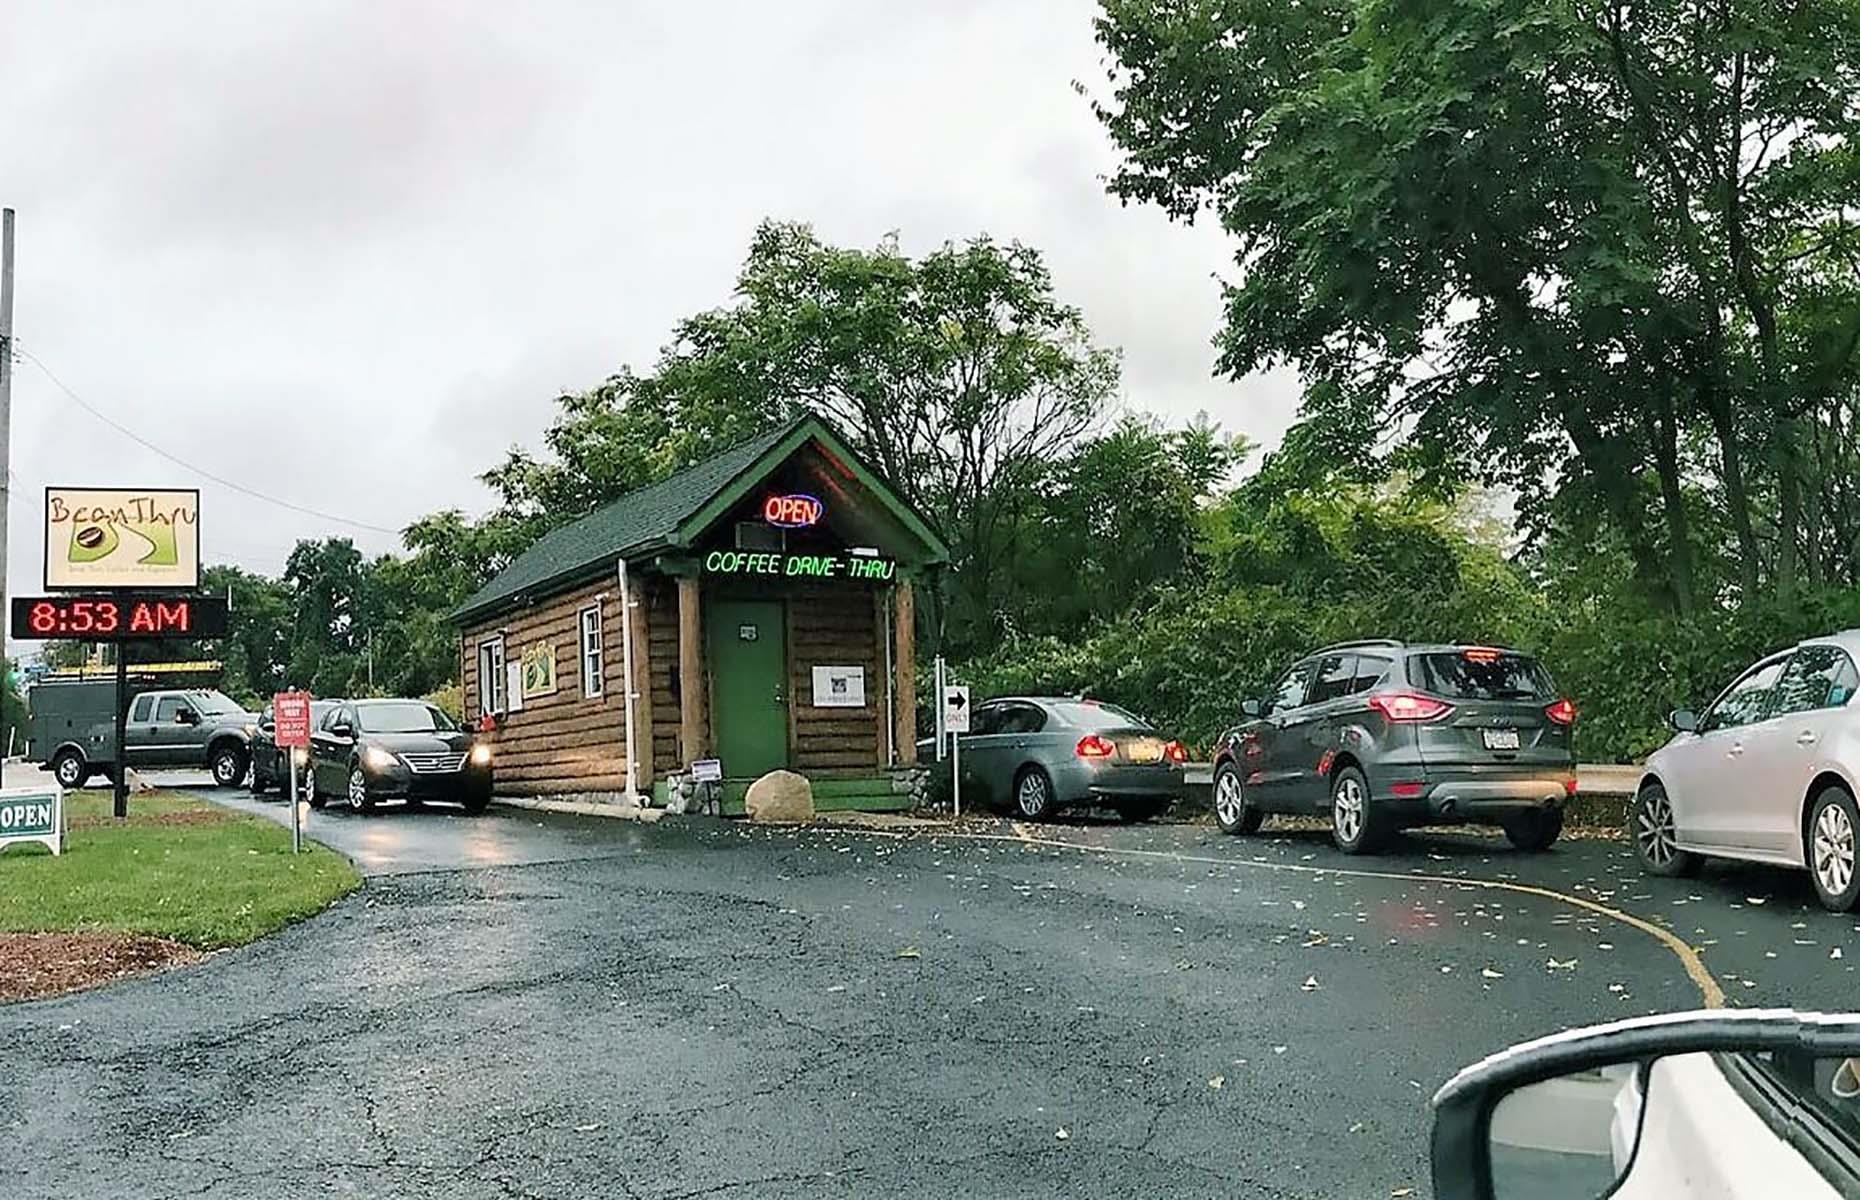 <p>Skip Starbucks and stop by BeanThru drive-thru on Ohio River Boulevard if you’re in the Pittsburgh area. It has peach smoothies, cream cheese bagels and peanut butter bars, and the <a href="https://www.yelp.co.uk/biz/beanthru-pittsburgh-2">coffee is unbeatable</a>. There’s another outpost on William Flinn Highway, loved by regulars on Route 8.</p>  <p><a href="https://www.lovefood.com/galleries/73229/americas-best-drivethru-restaurants?page=1"><strong>If you loved this you might like America’s best drive-thru restaurants</strong></a></p>